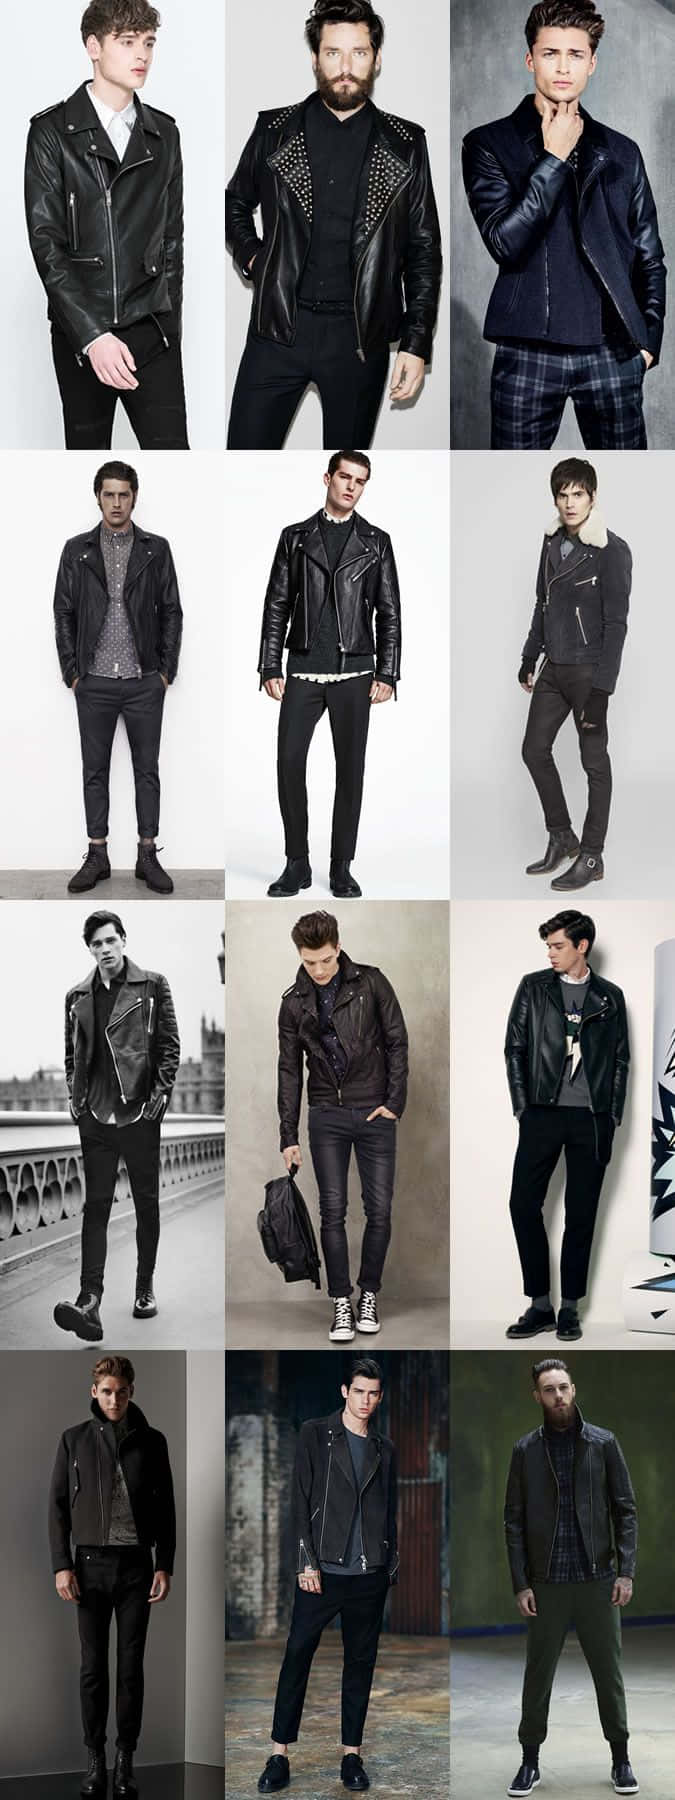 A stylish black clothing look perfect for any occasion!" Wallpaper